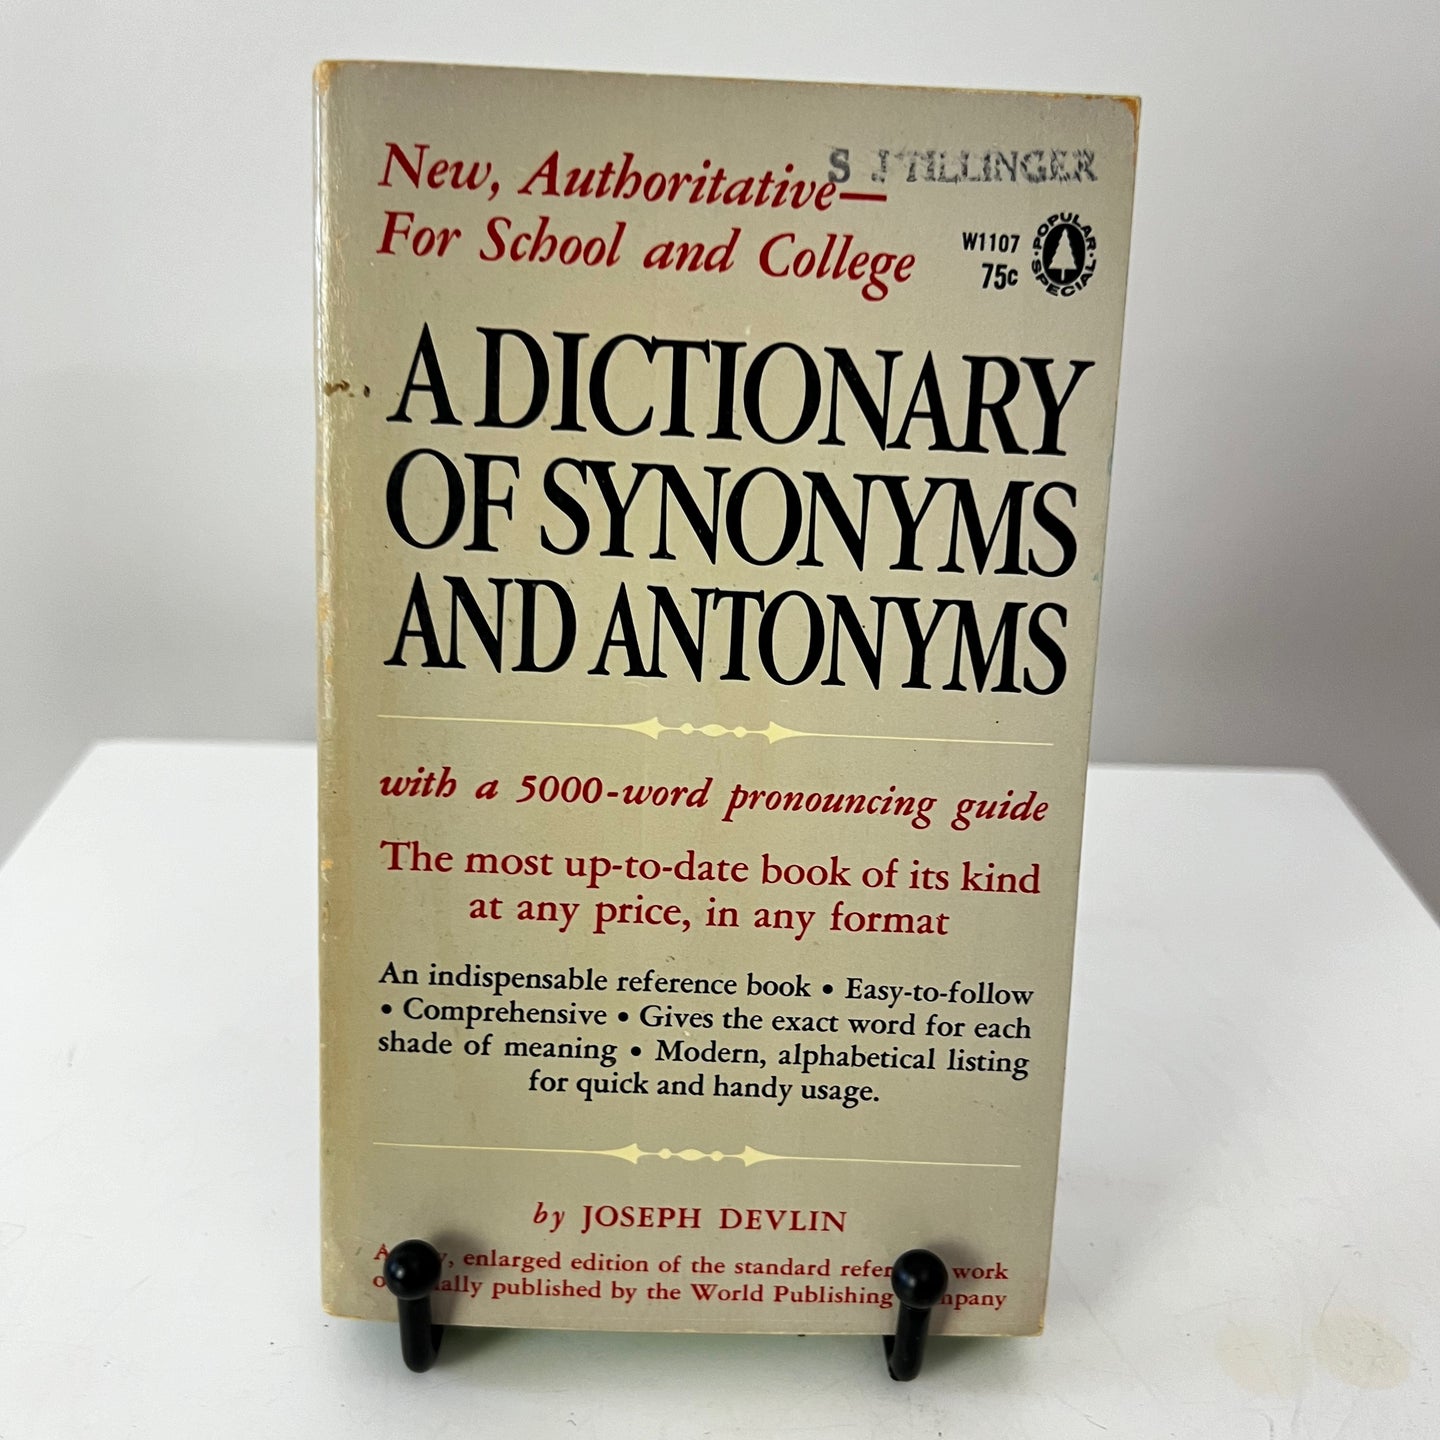 A Dictionary of Synonyms and Antonyms with 5000 Words